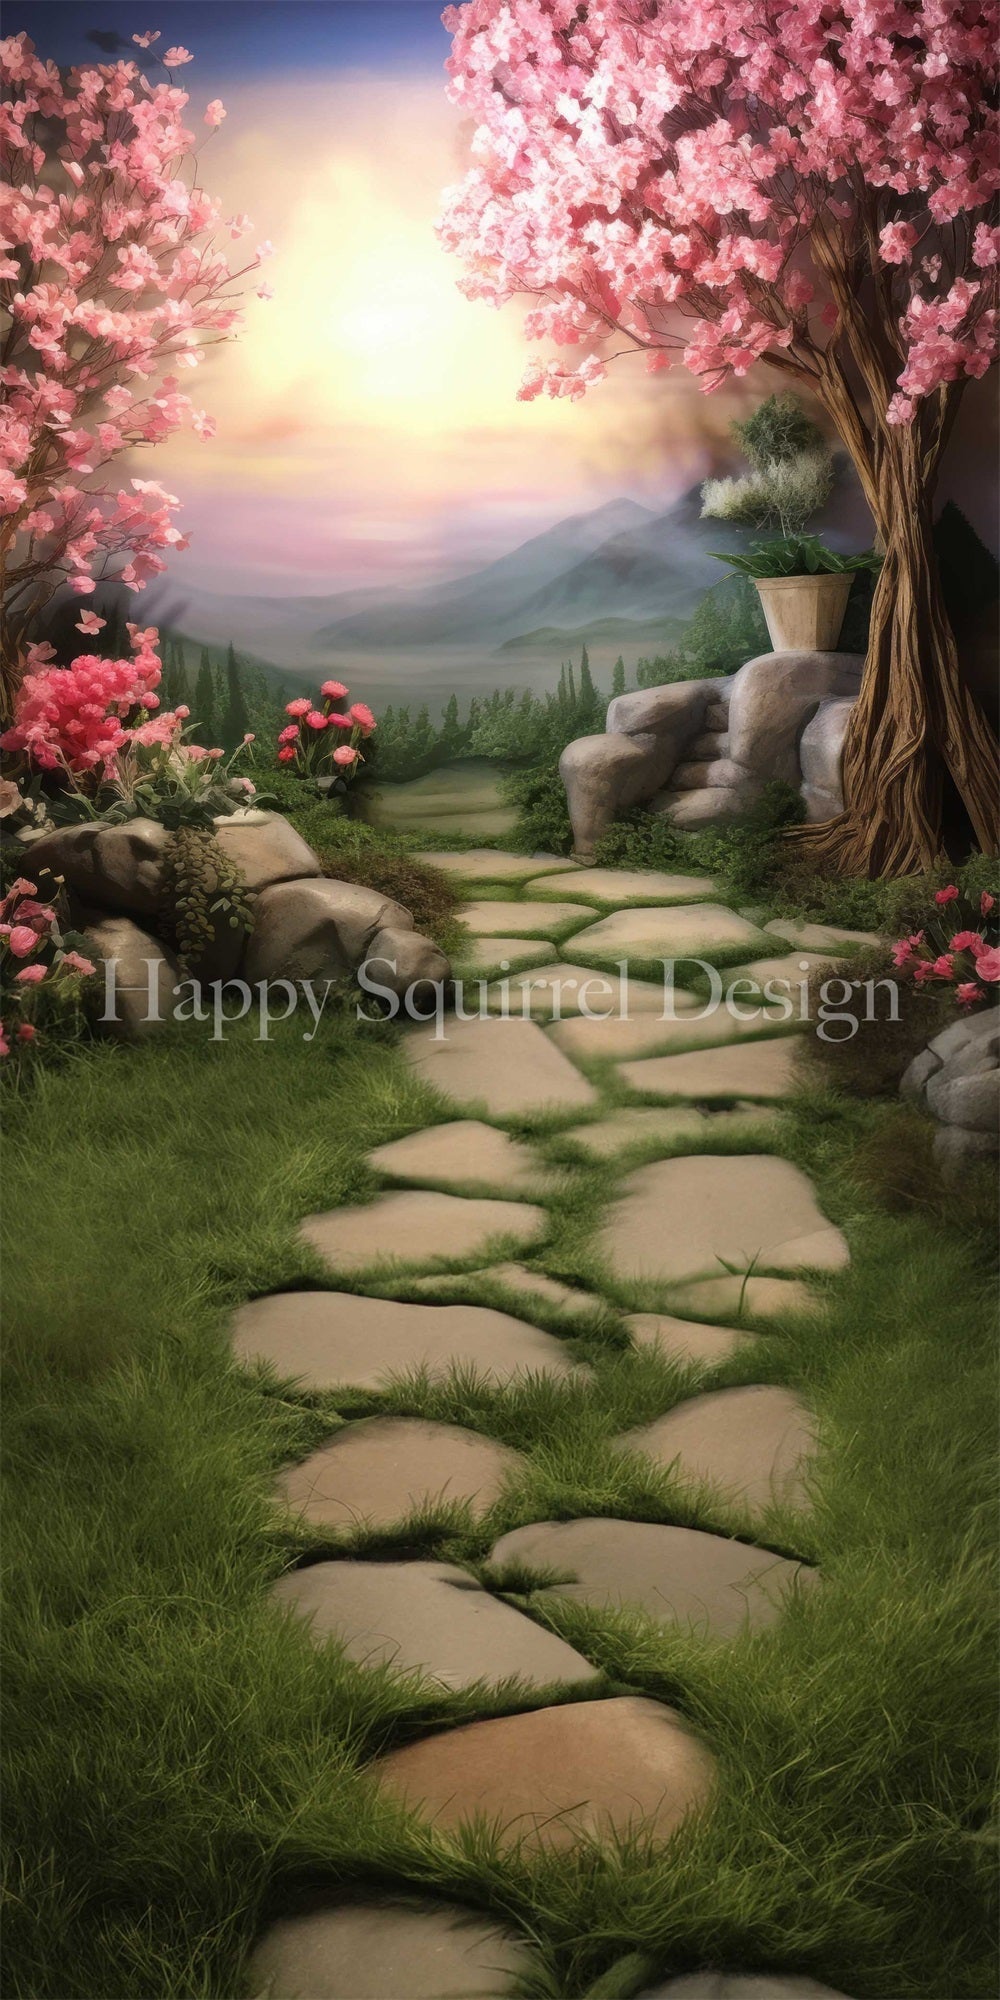 Lightning Deal #3 Kate Sweep Spring Fantasy Bokeh Pink Cherry Blossom Flower Forest Mountain Green Meadow Stone Road Backdrop Designed by Happy Squirrel Design